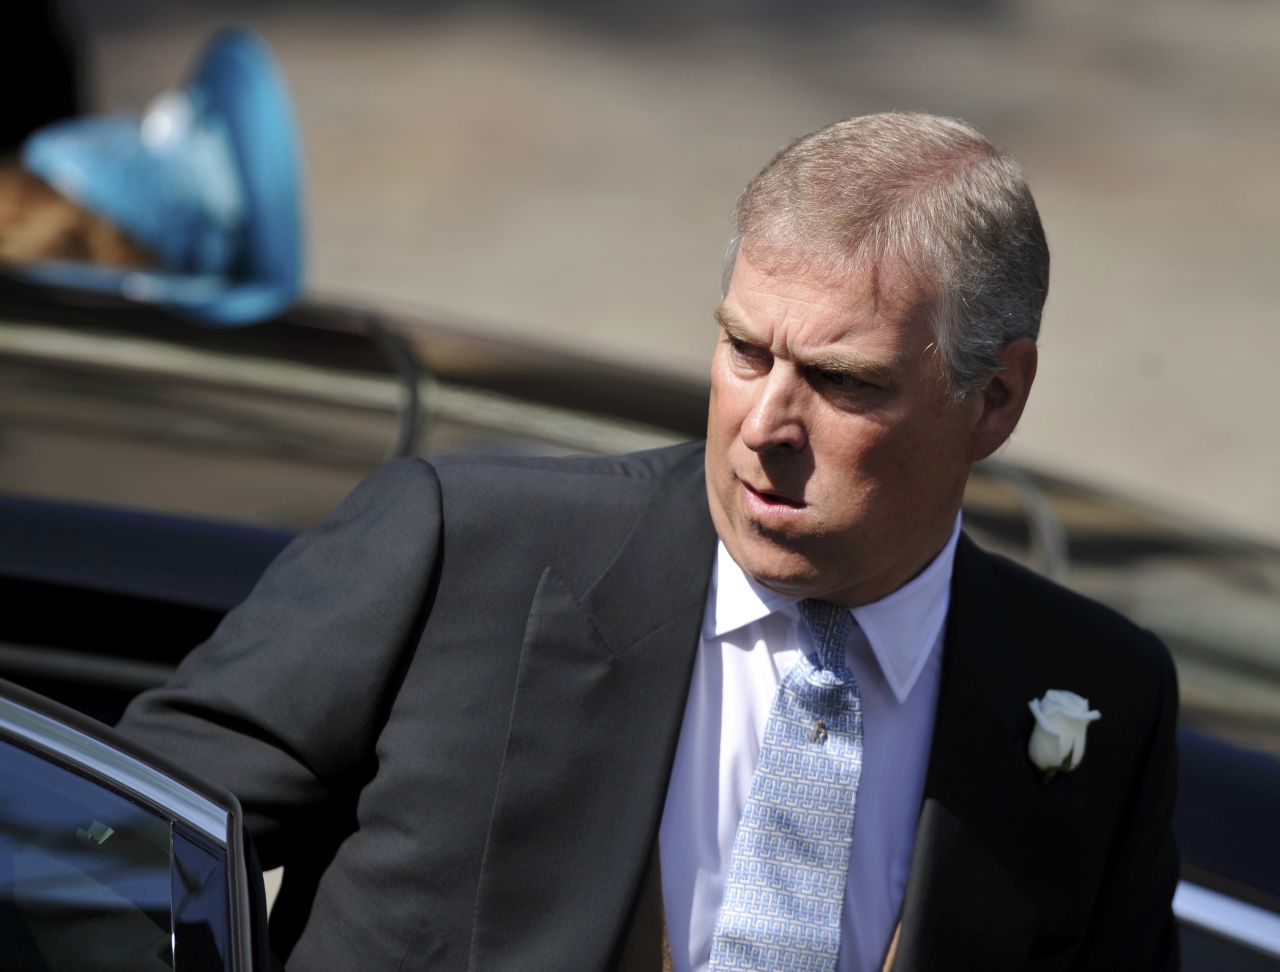 In 2011, Prince Andrew resigned as UK trade envoy. He had come under criticism for his friendship with U.S. billionaire Jeffrey Epstein who was jailed for 18 months  in 2008 after admitting prostitution solicitation.